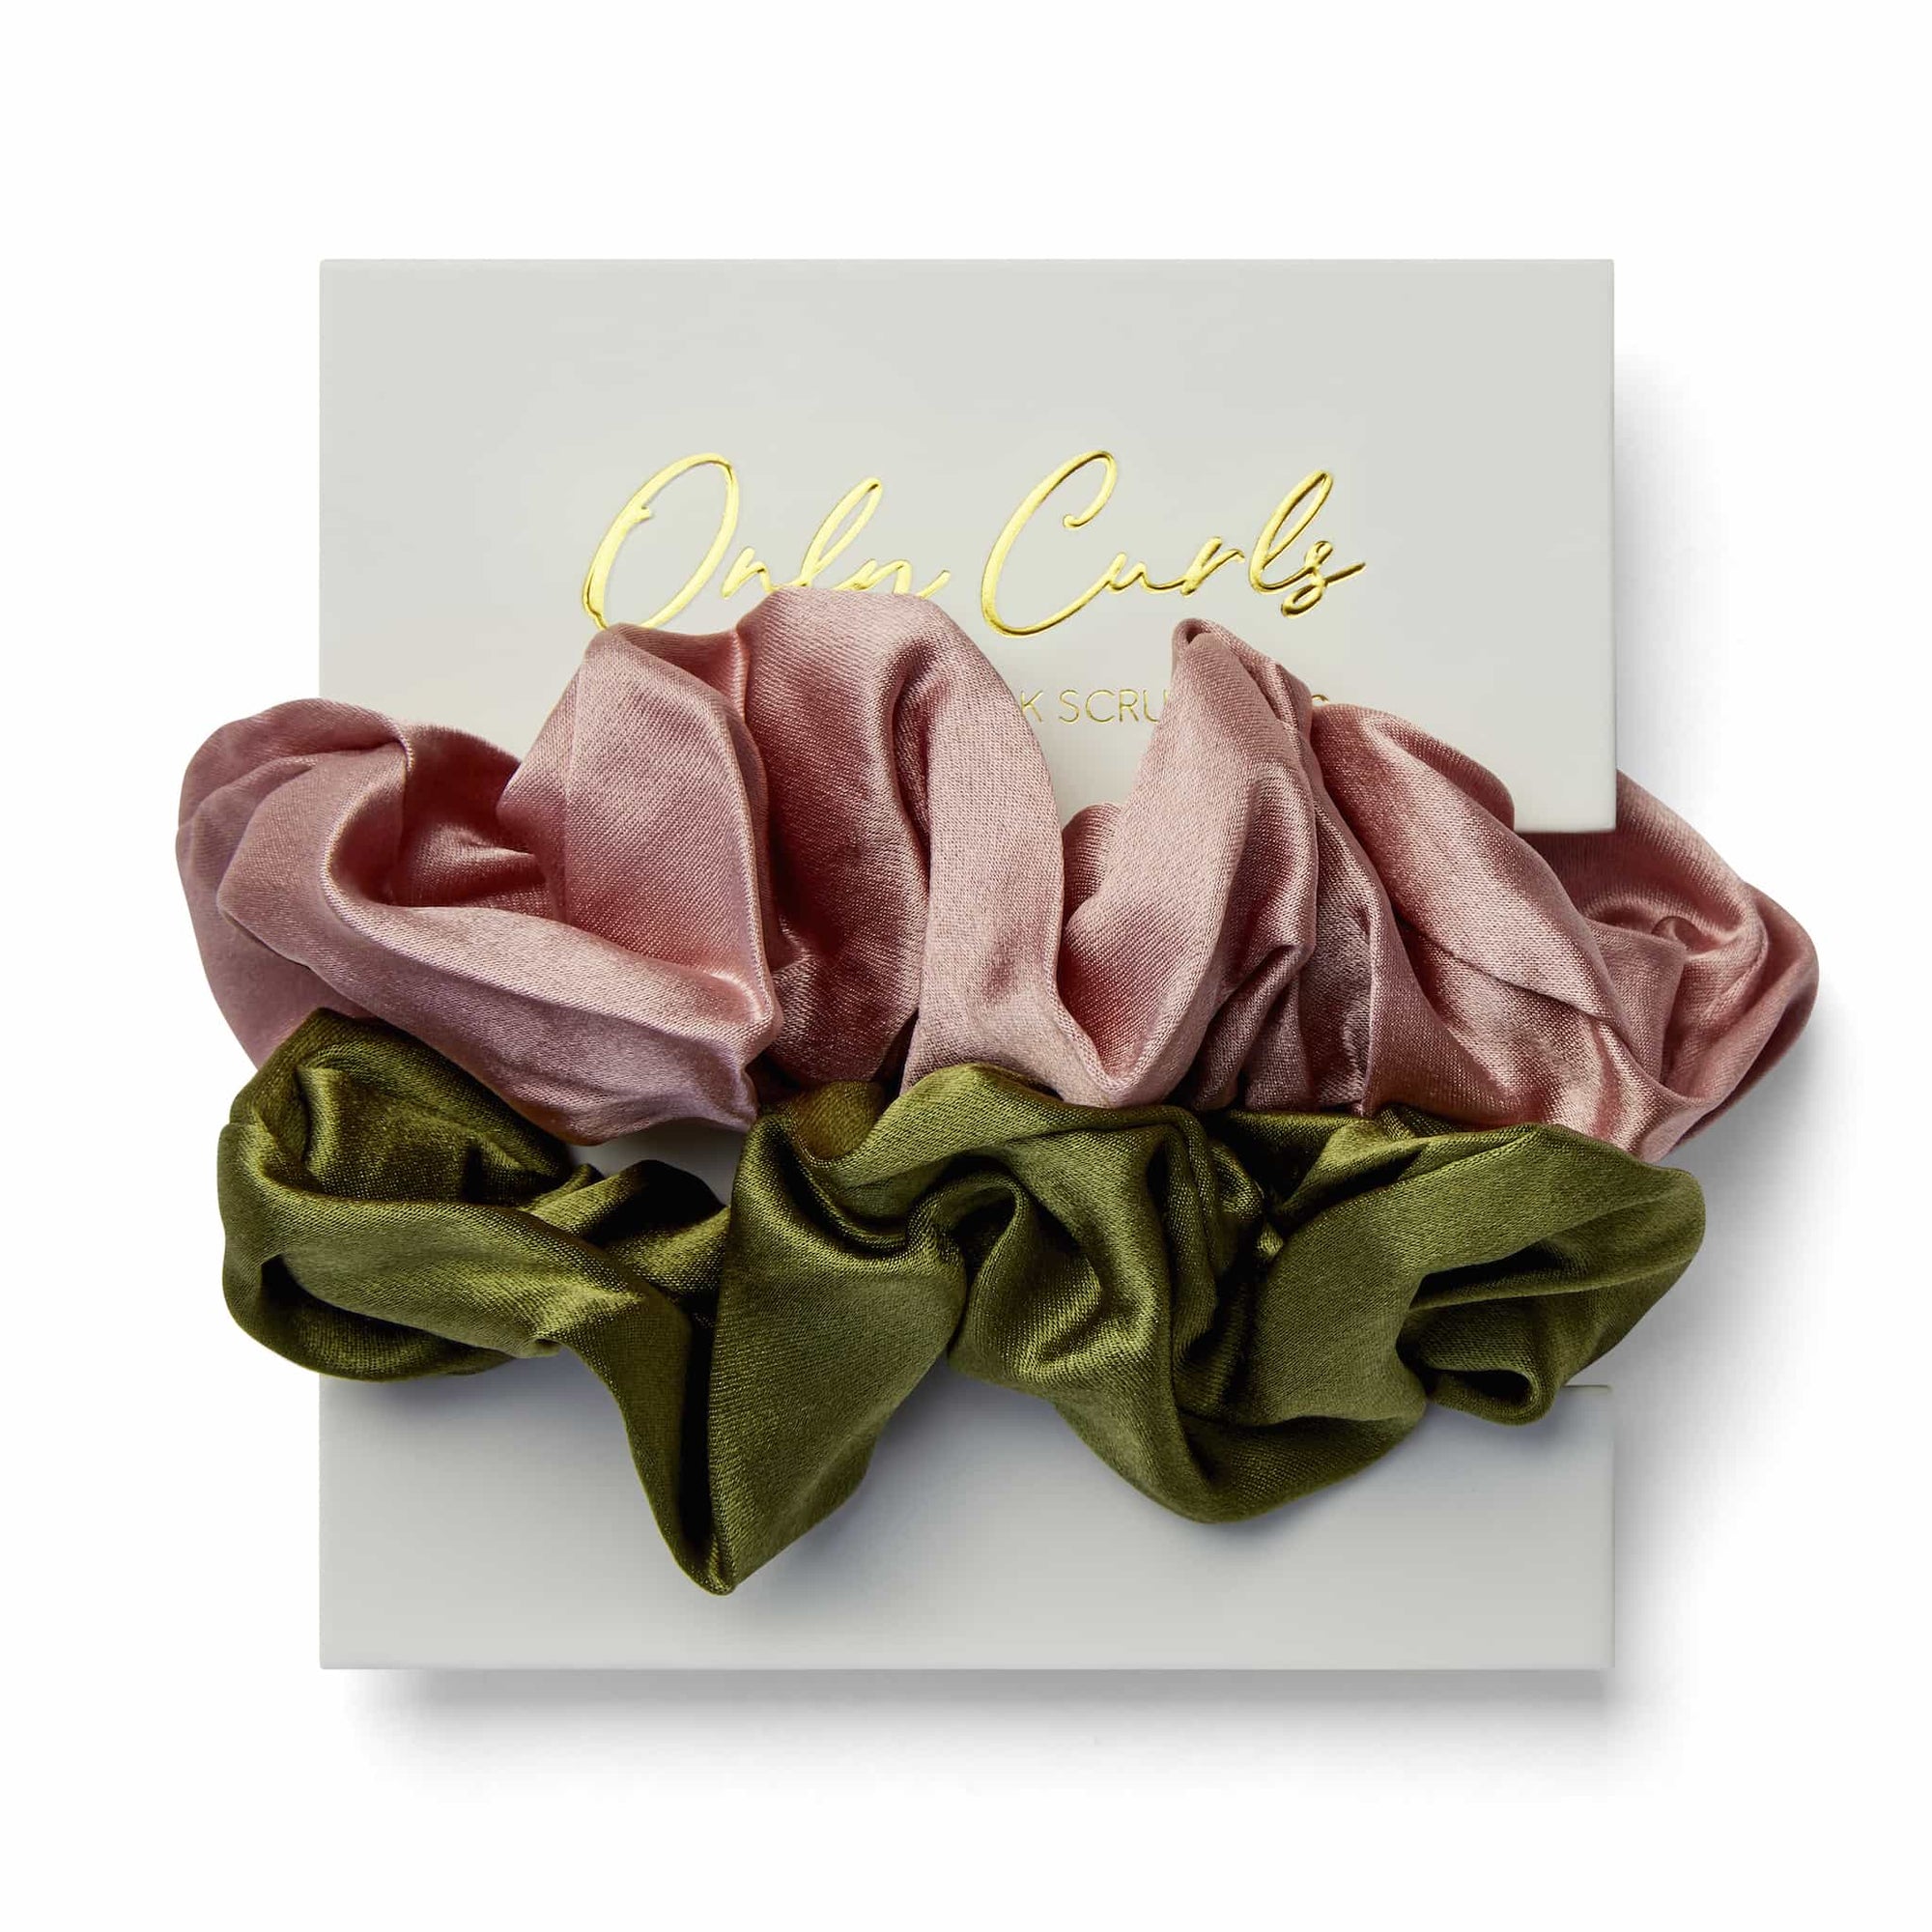 Only Curls Silk Scrunchies Multi Pack - Pink and Olive - Only Curls